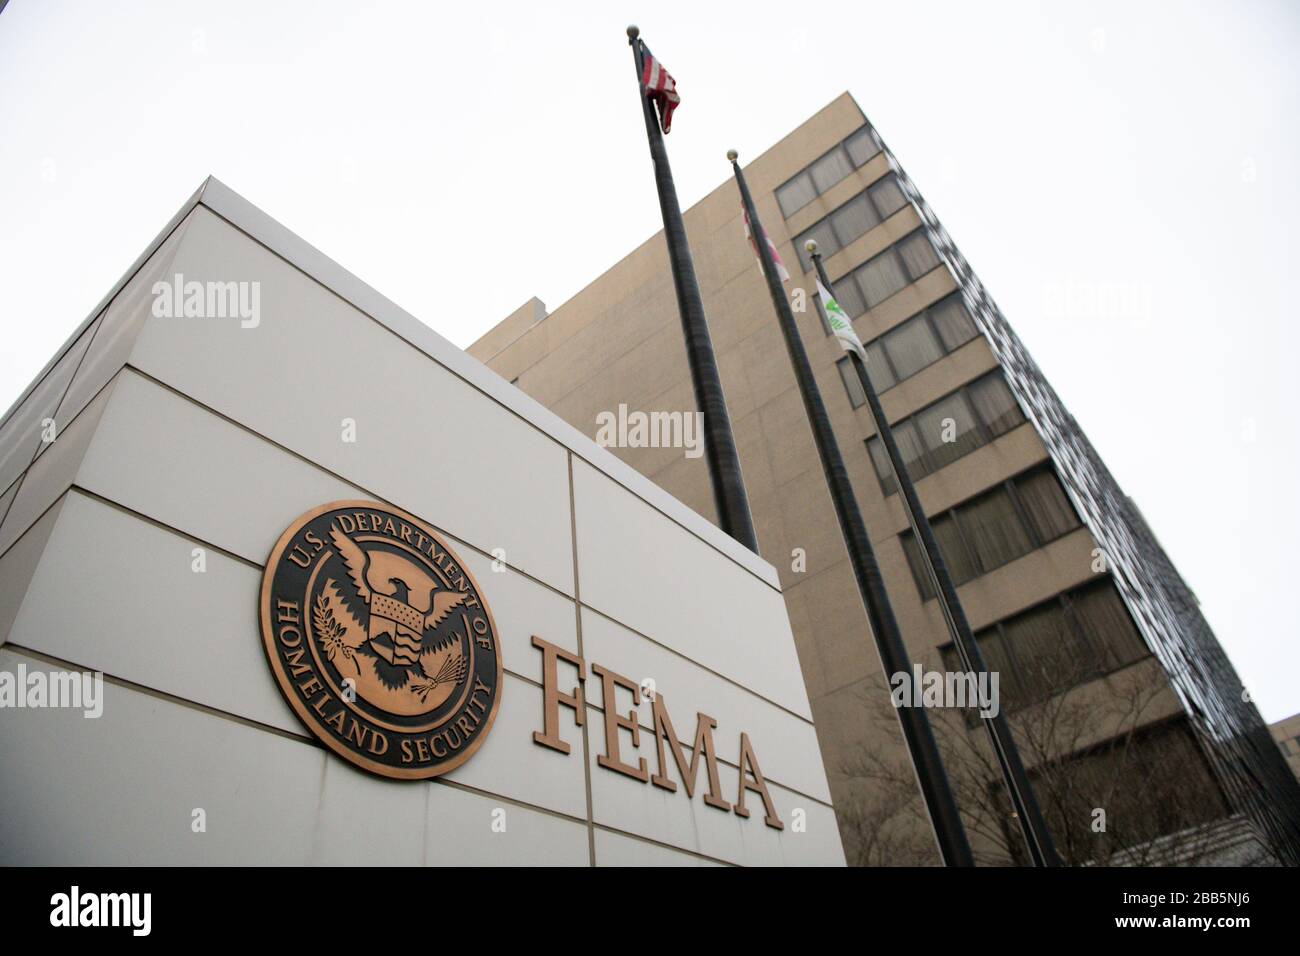 Washington, USA. 30th Mar, 2020. A general view of the U.S. Federal Emergency Management Agency (FEMA), which has taken the lead on the Federal coronavirus response, as seen in Washington, DC, on Monday, March 30, 2020, amid the coronavirus pandemic. Over the weekend President Trump announced the Centers for Disease Control and Prevention (CDC) guidelines for social distancing would be extended through April 30 to further try reduce the spread of COVID-19. (Graeme Sloan/Sipa USA) Credit: Sipa USA/Alamy Live News Stock Photo